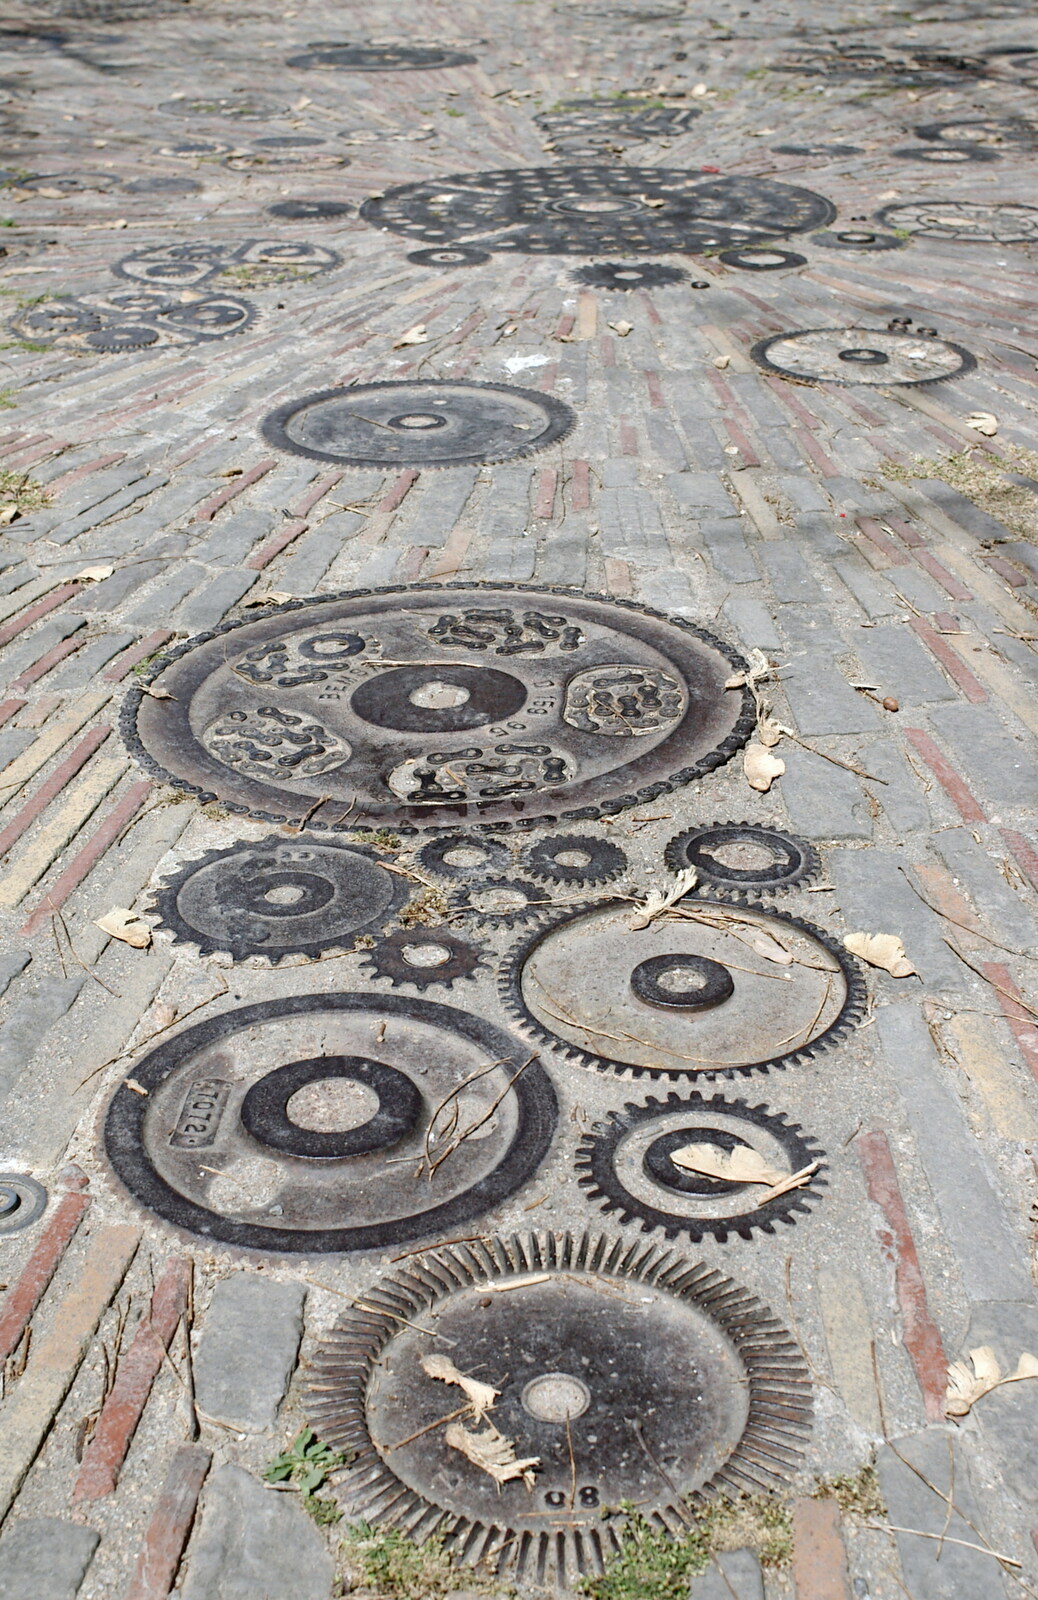 A pavement made up with cogs and gears from Montjuïc and Sant Feliu de Guíxols, Barcelona, Catalunya - 30th April 2005